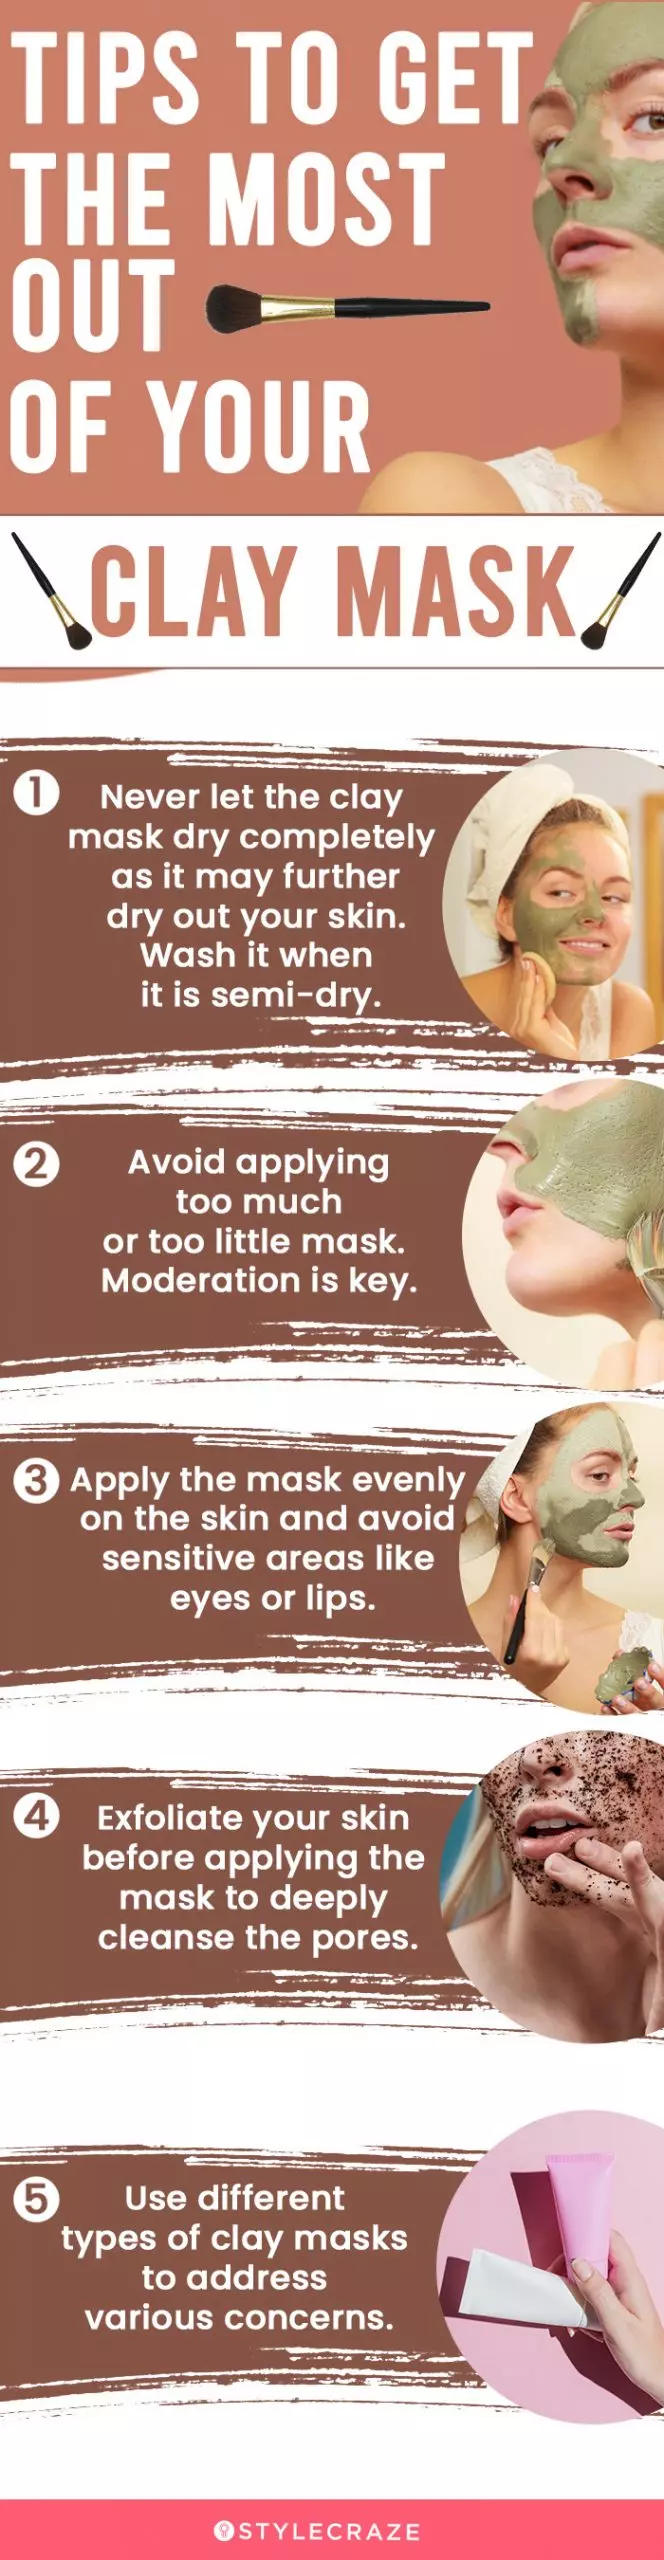 Tips To Get The Most Out Of Your Clay Mask (infographic)